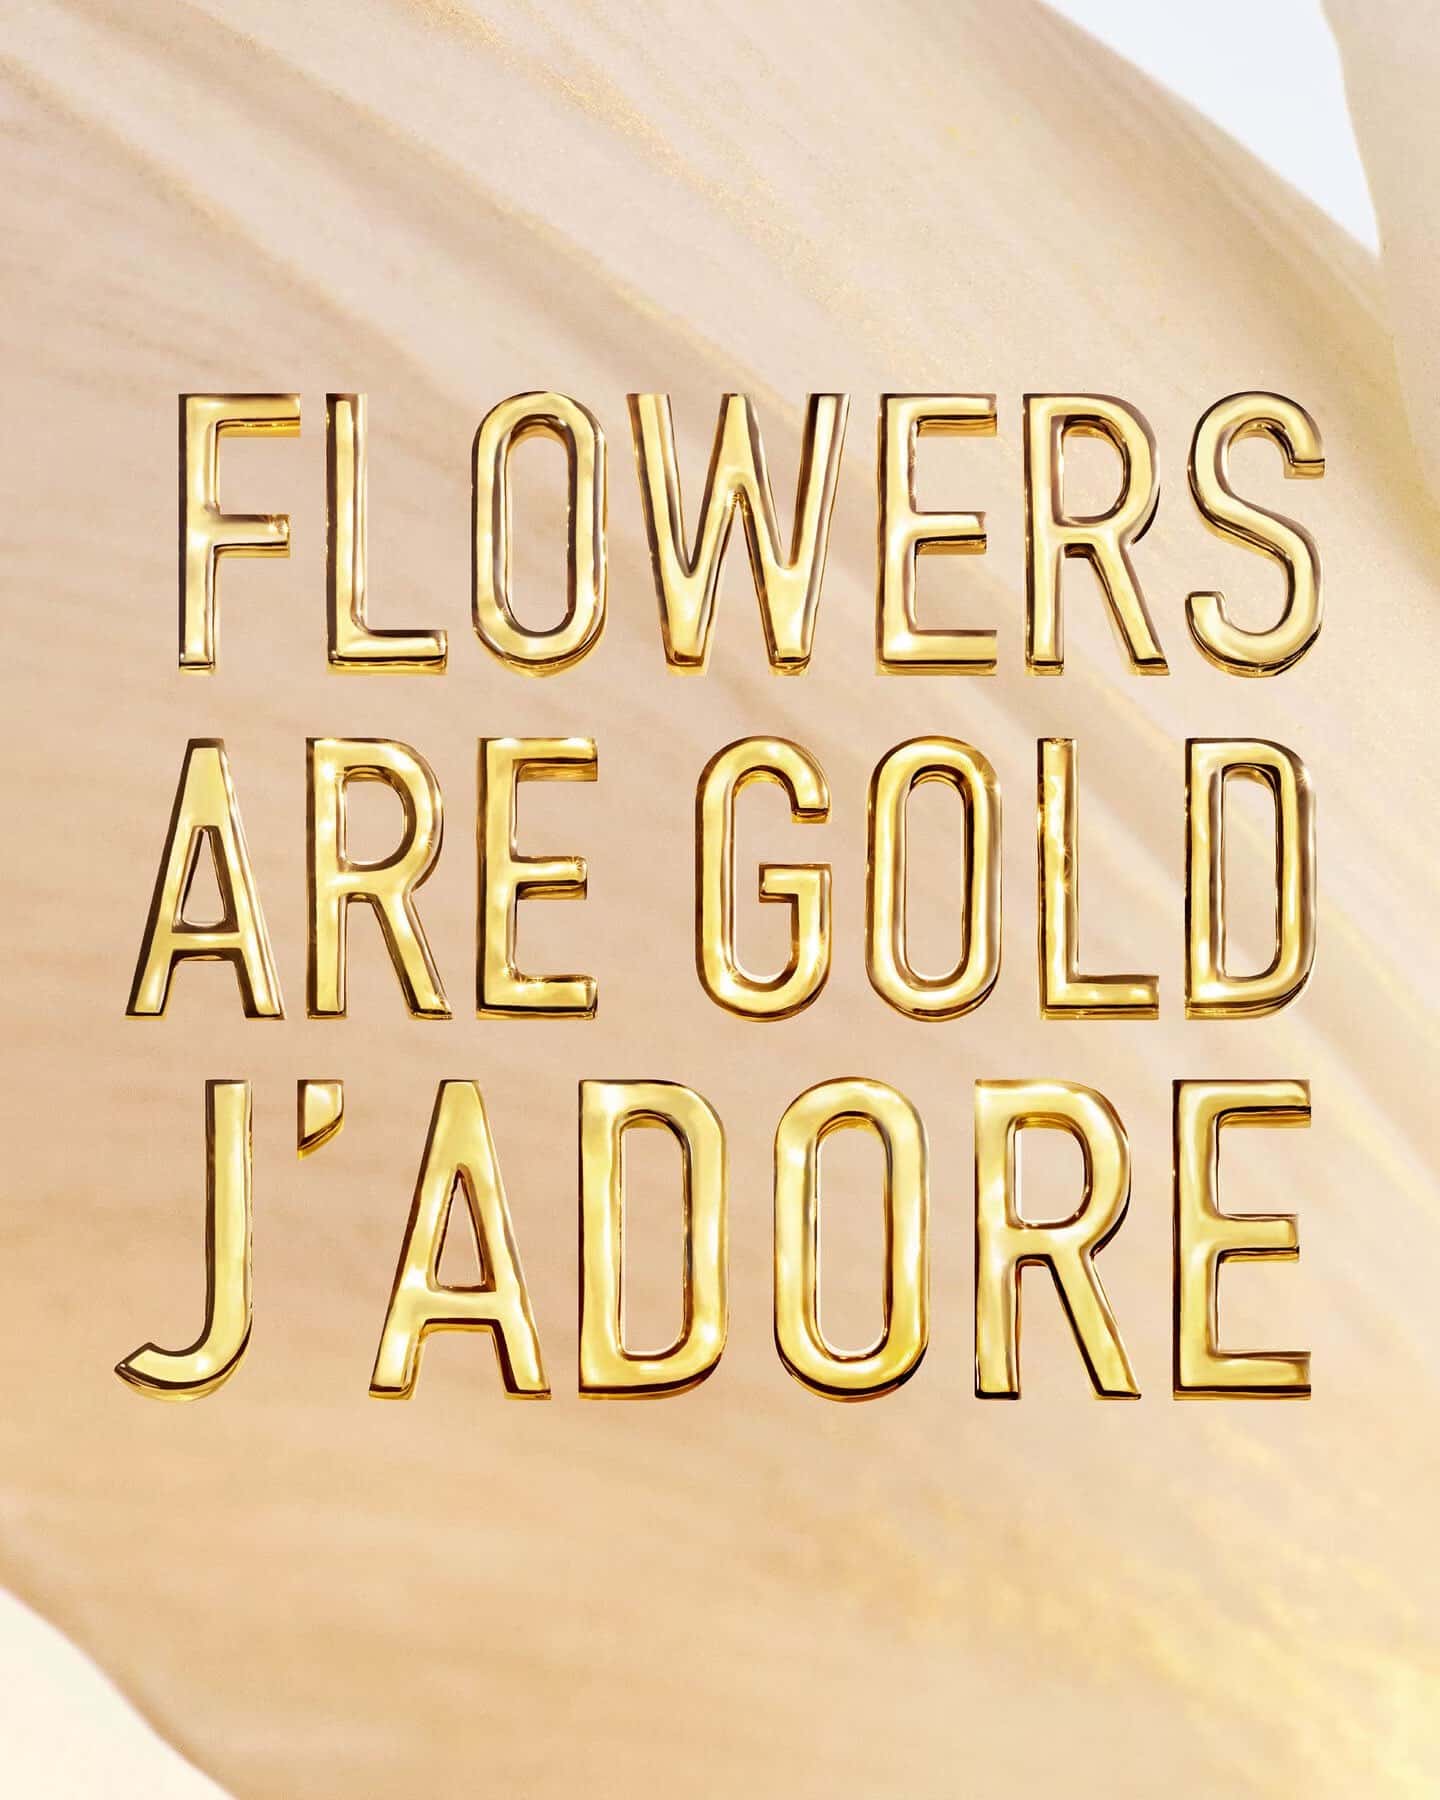 J'Adore by Dior: Floral radiance by Francis Kurkdjian - Paris Select